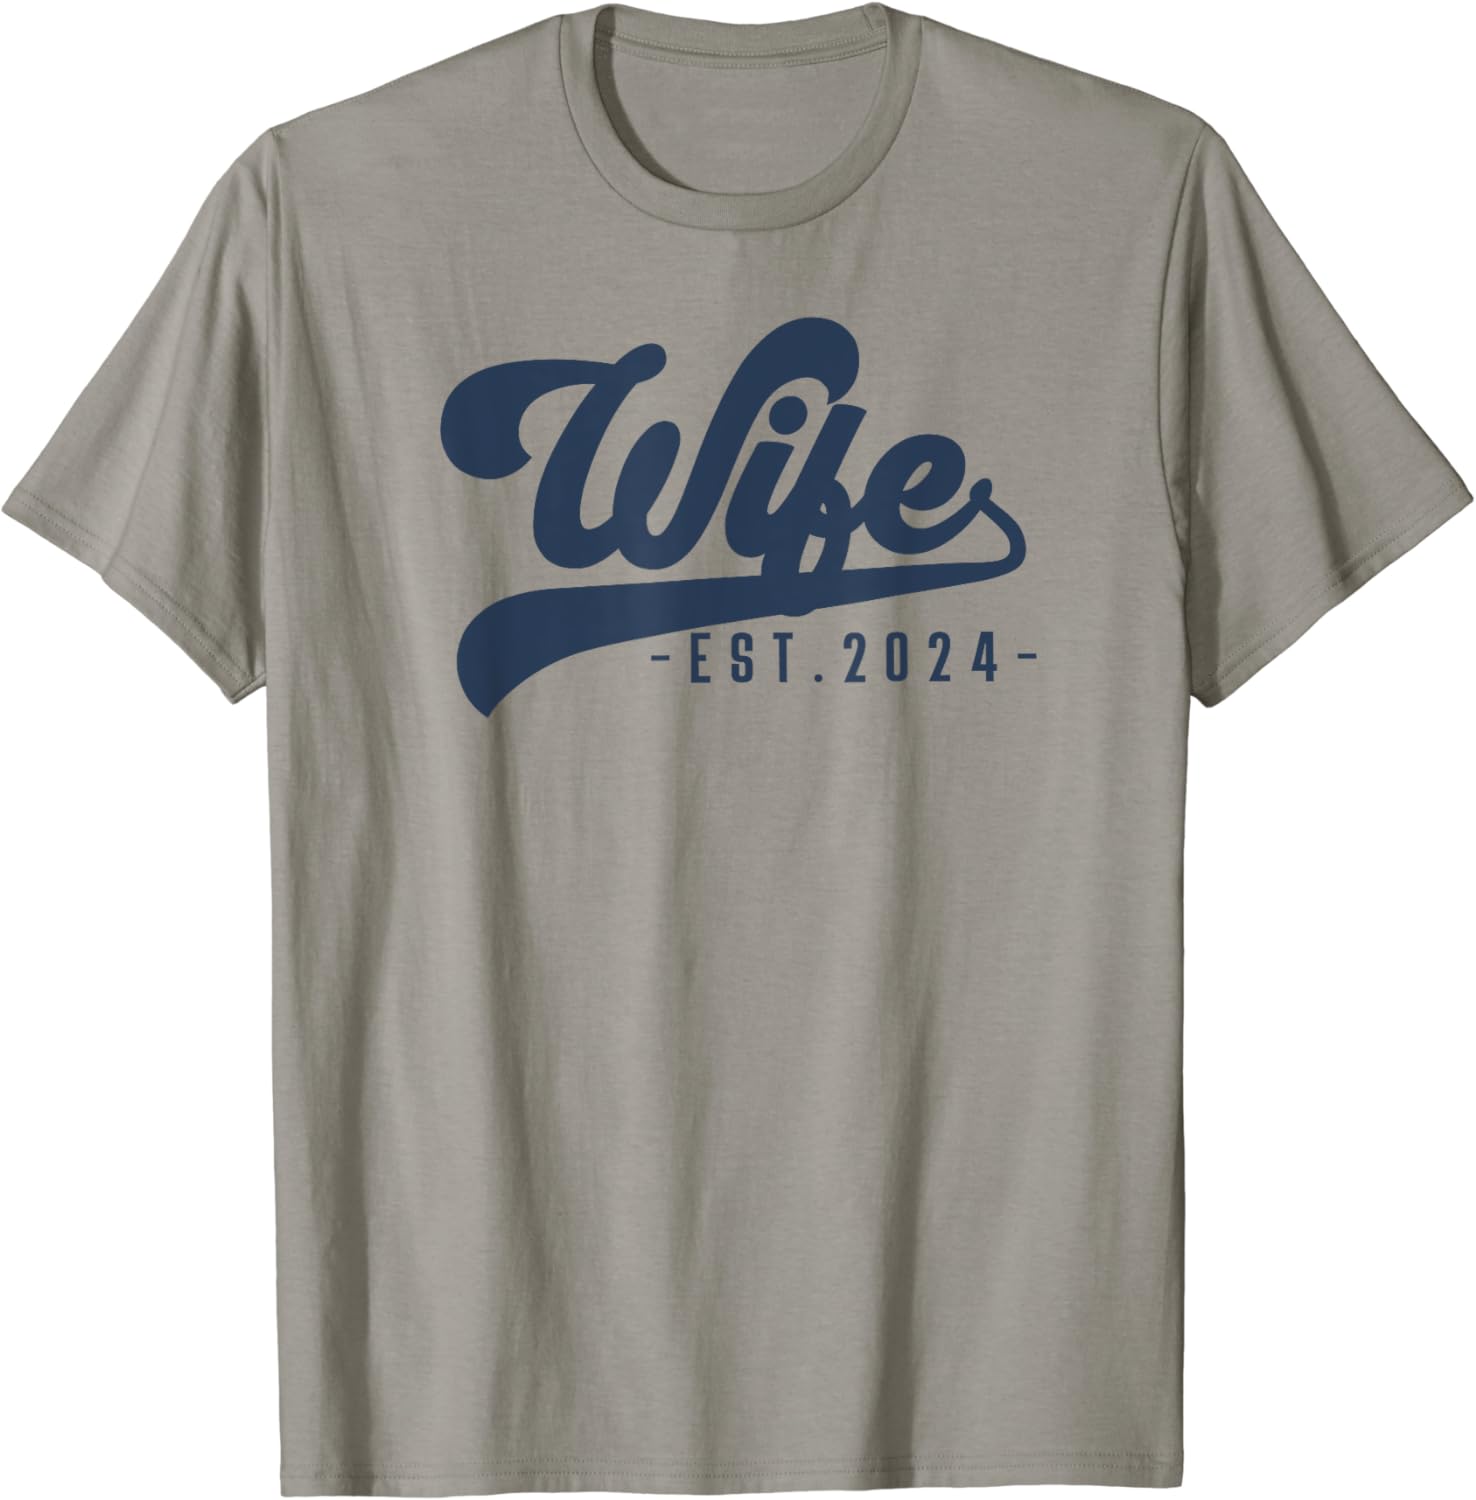 A grey t-shirt with blue text Description automatically generated